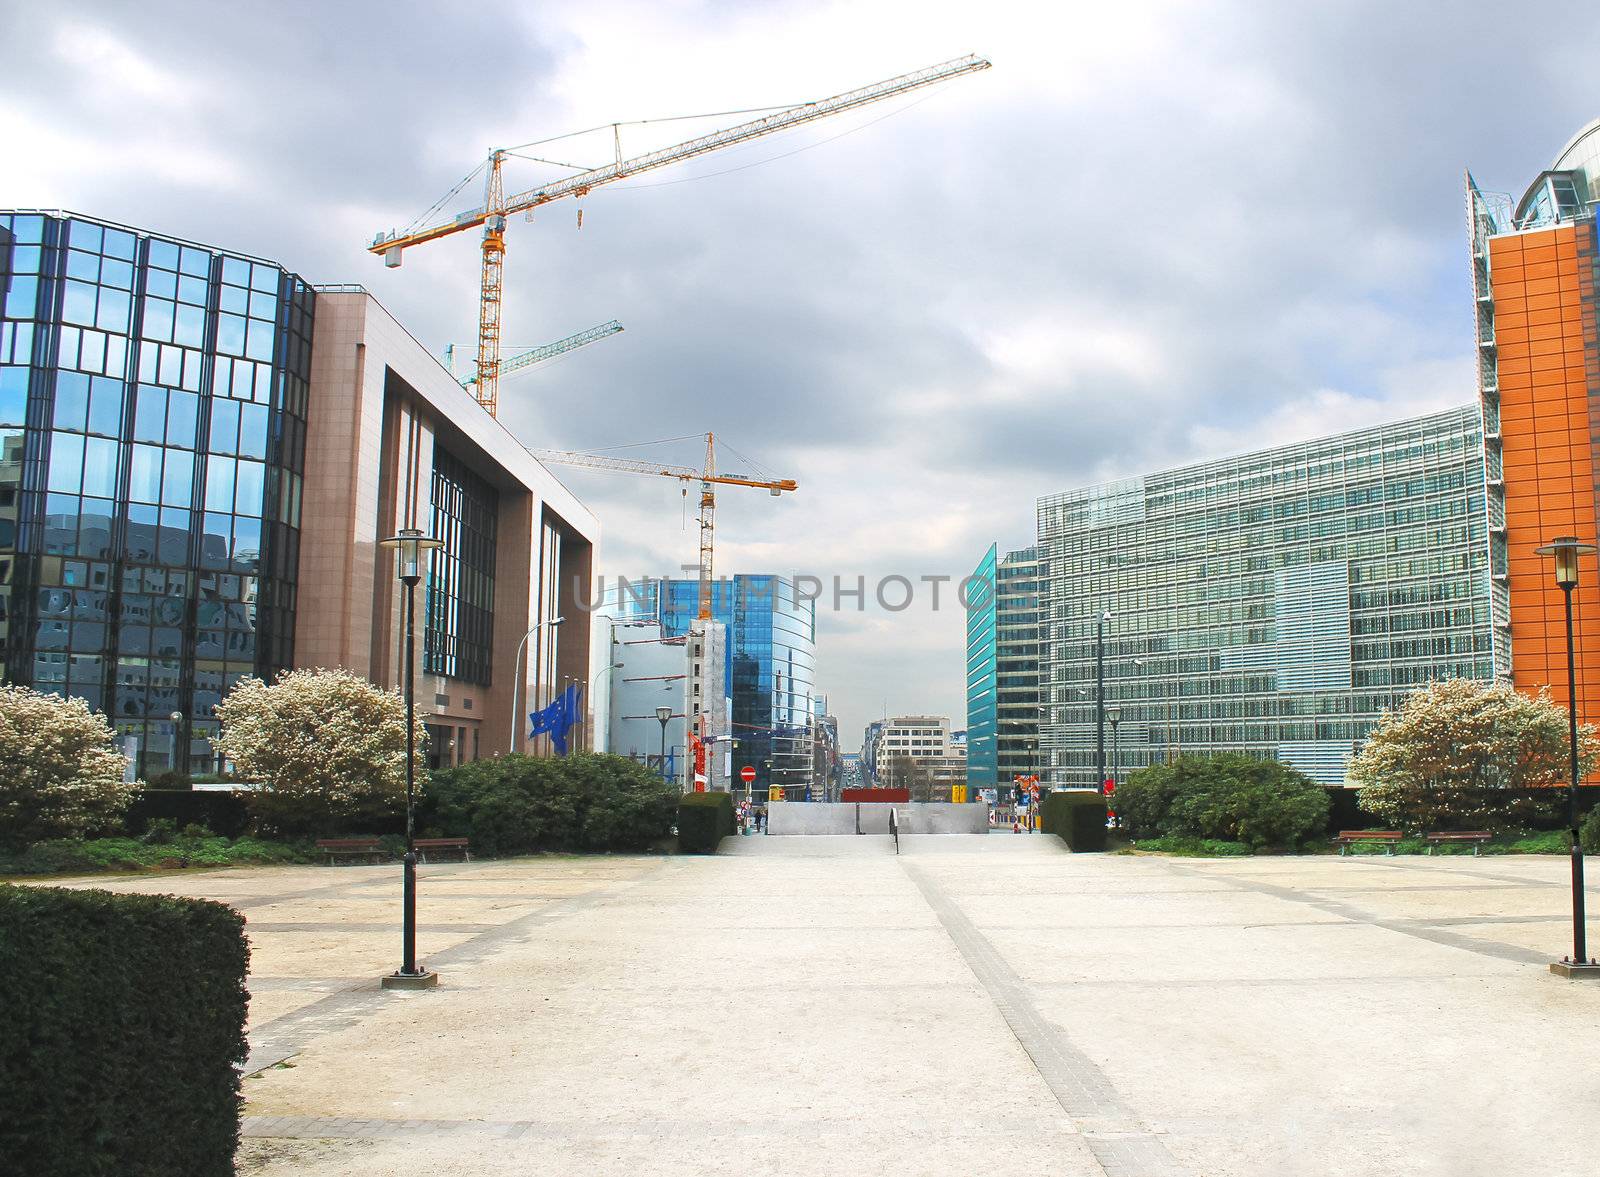 New buildings in Brussels. The European Parliament, Belgium  by NickNick